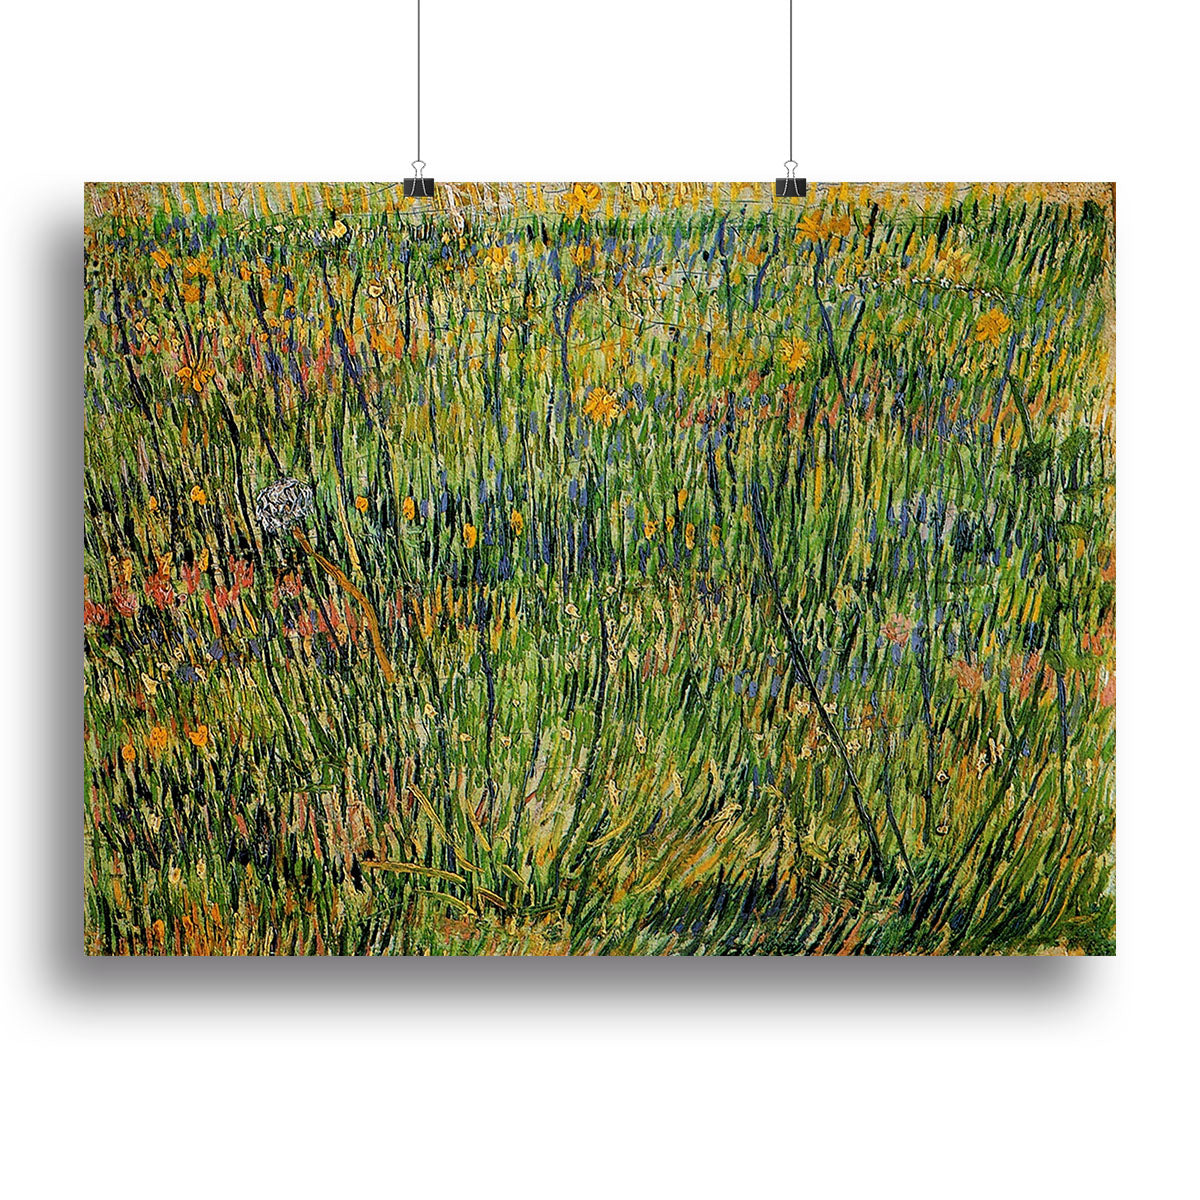 Pasture in Bloom by Van Gogh Canvas Print or Poster - Canvas Art Rocks - 2